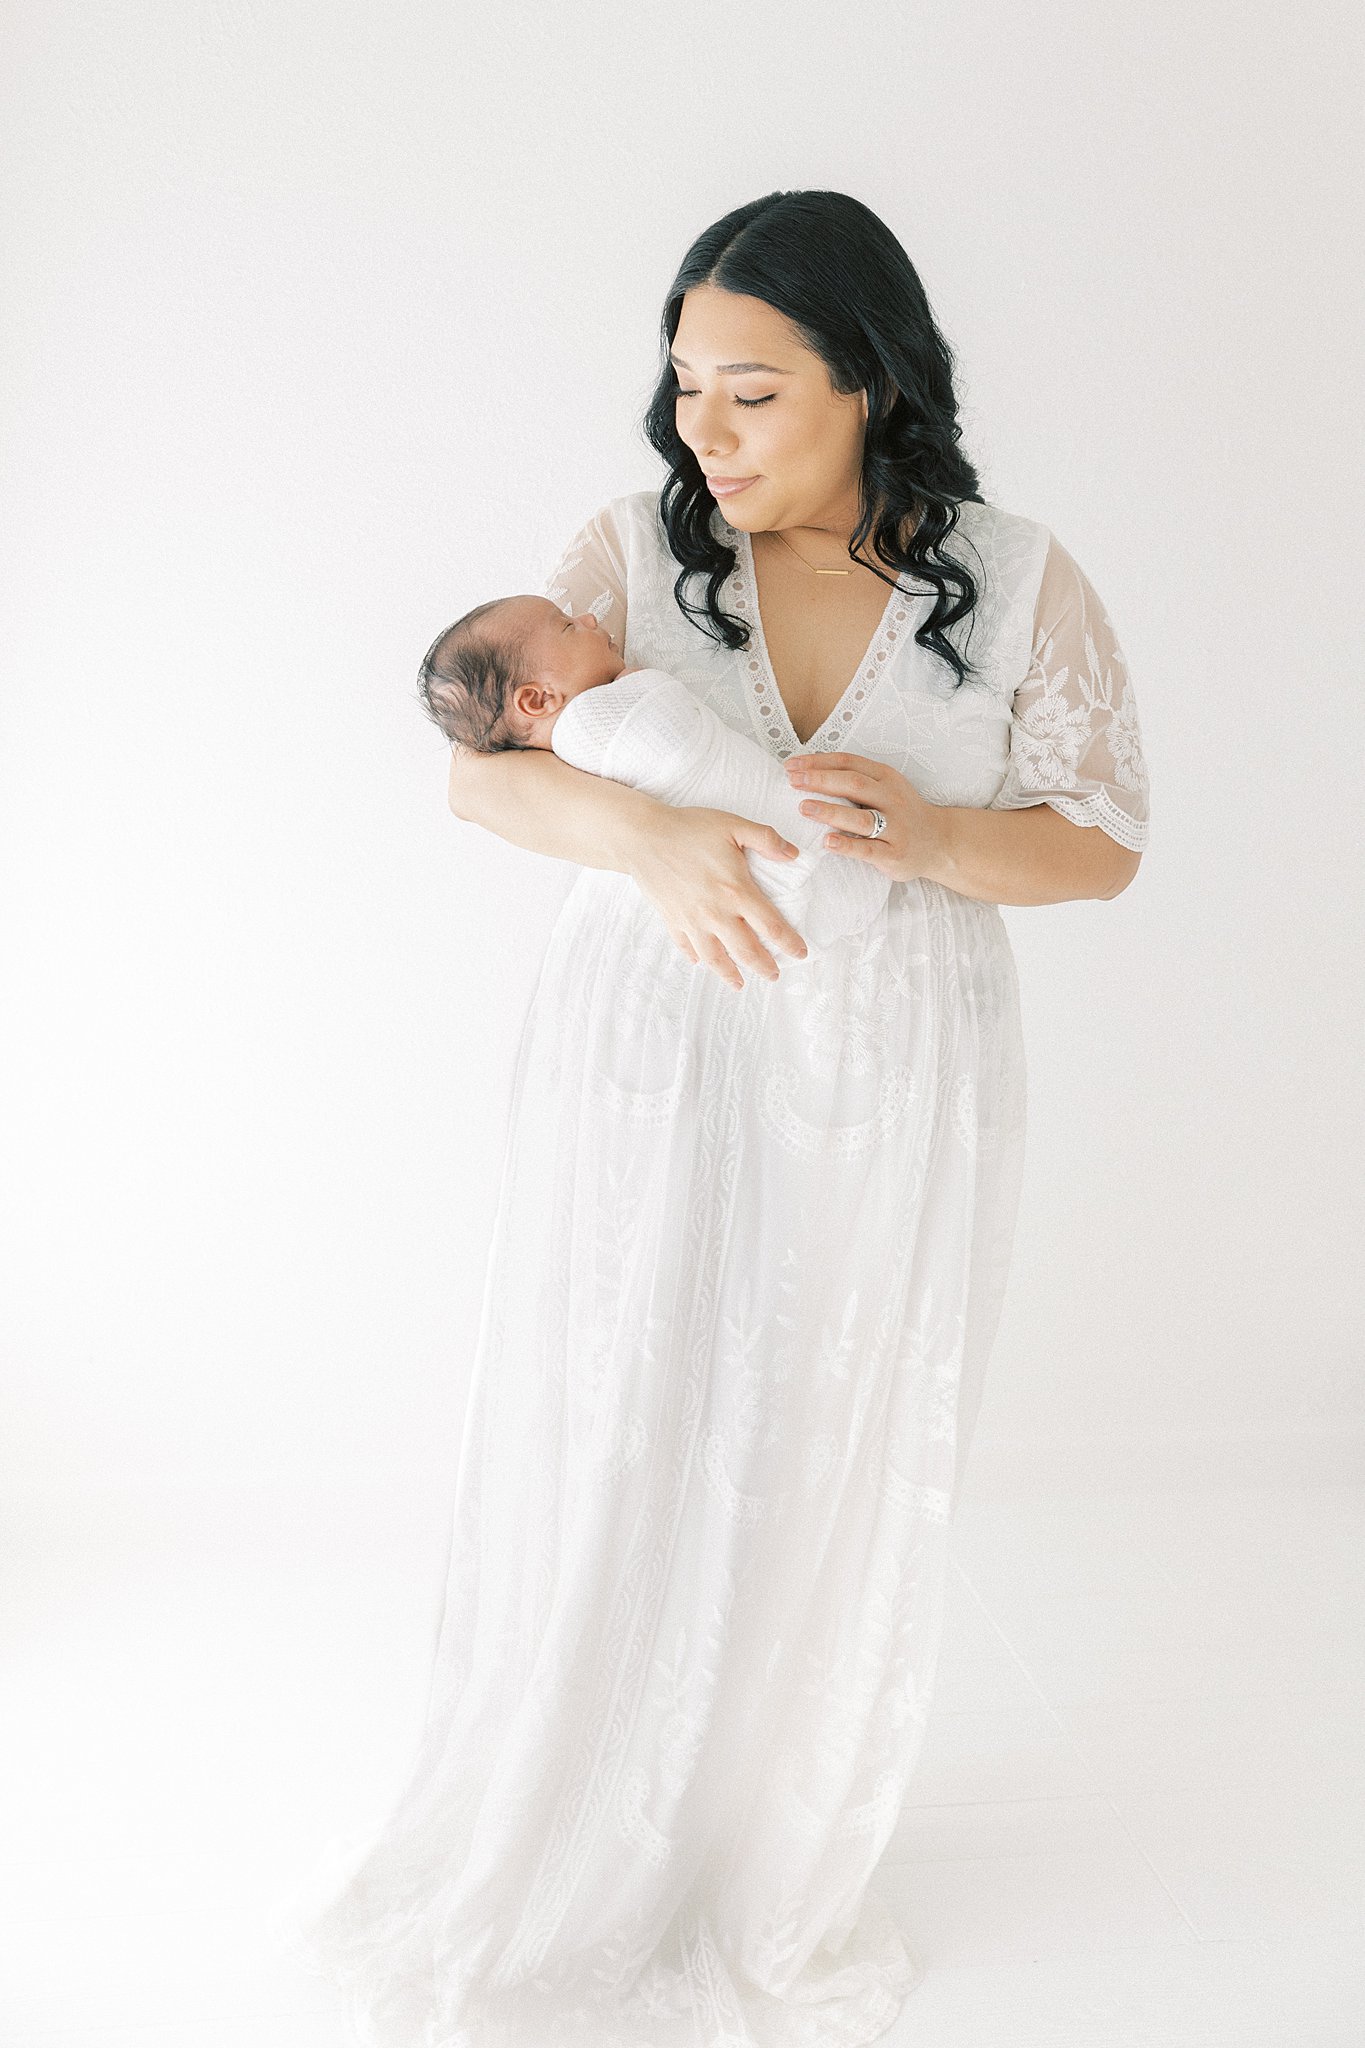 A mother in a white lace dress stands in a studio holding her newborn baby boy